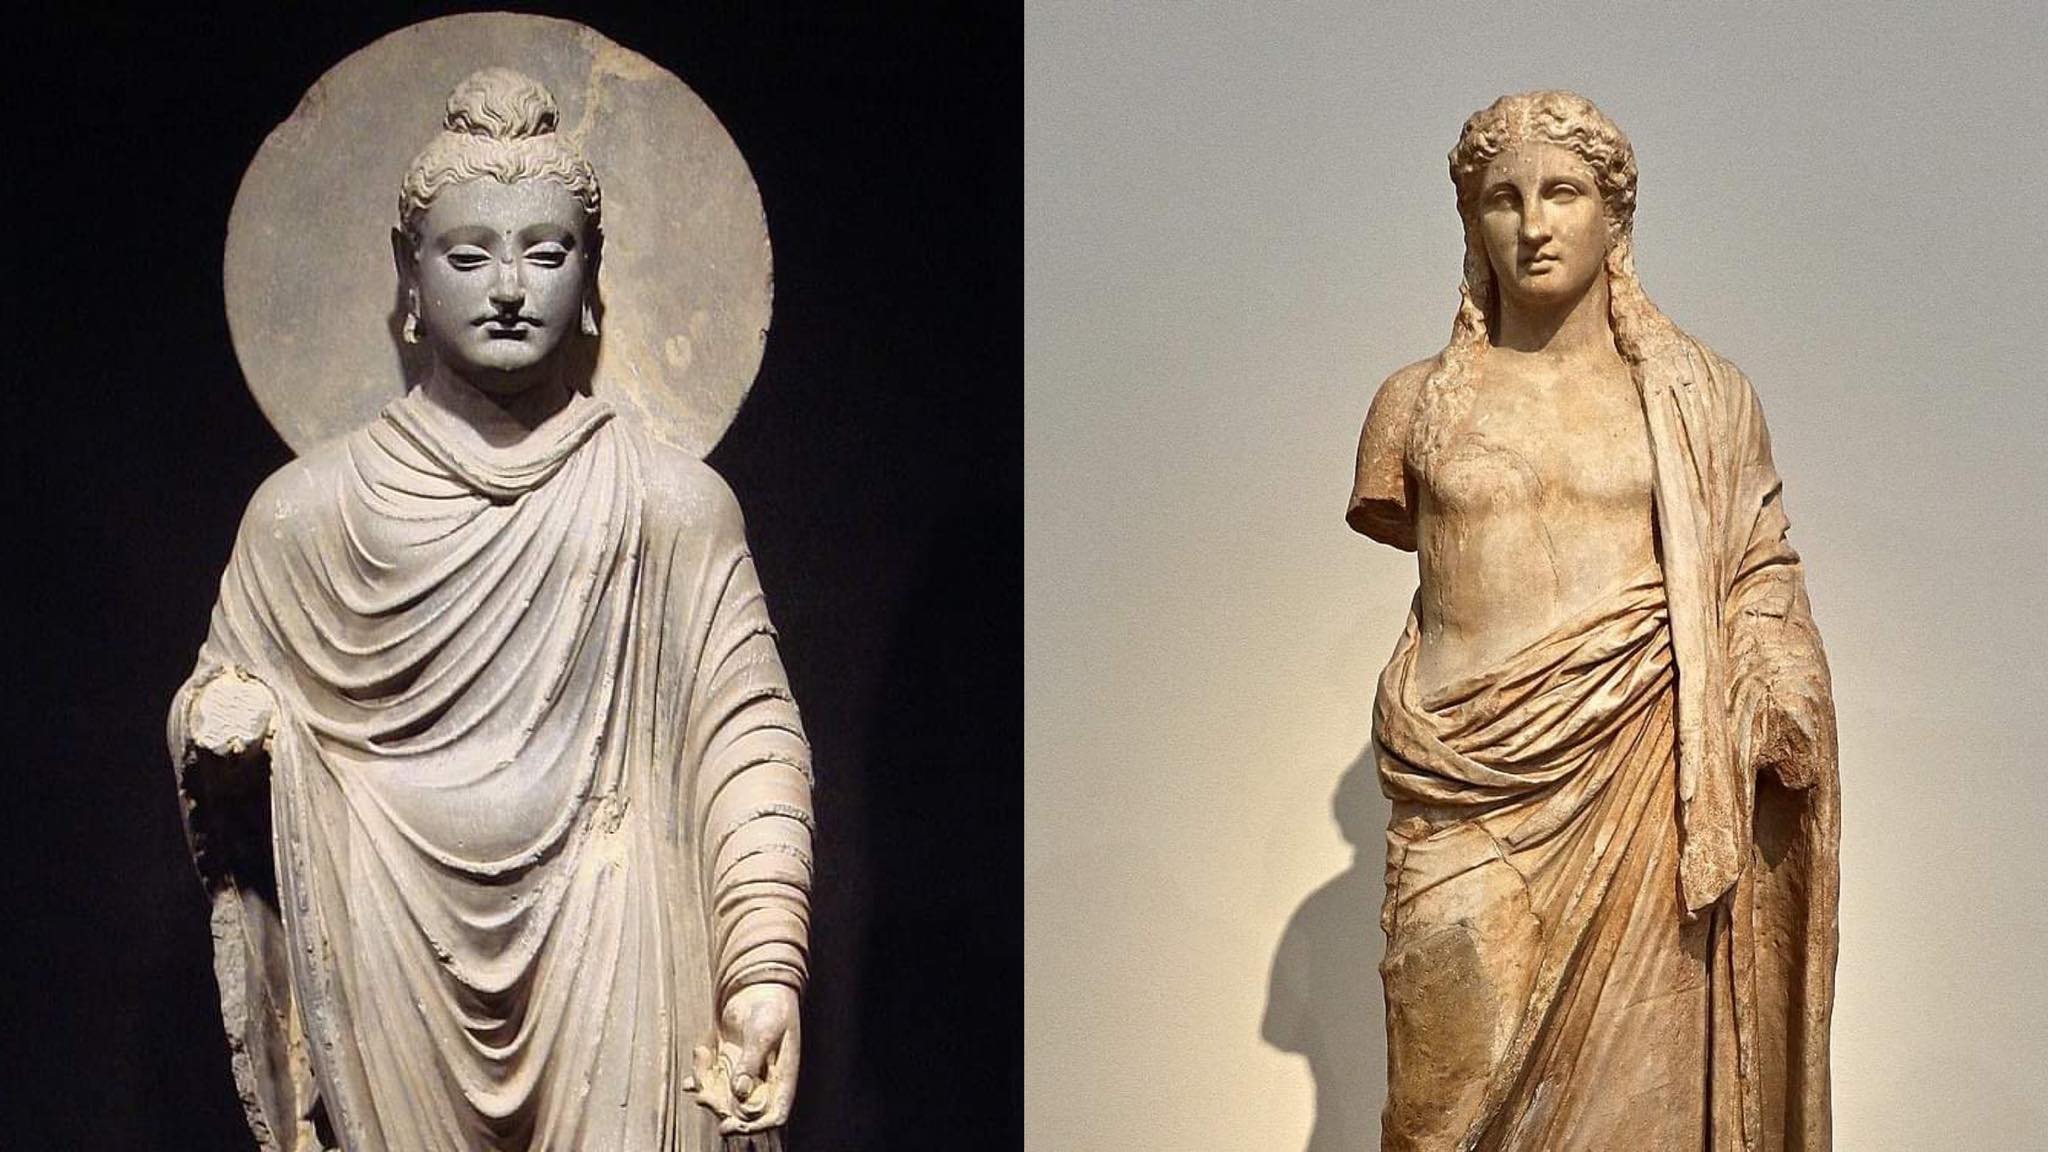 A statue of Buddha that shows the clear influence of ancient Greece on Buddhism, compared to an ancient Greek statue.